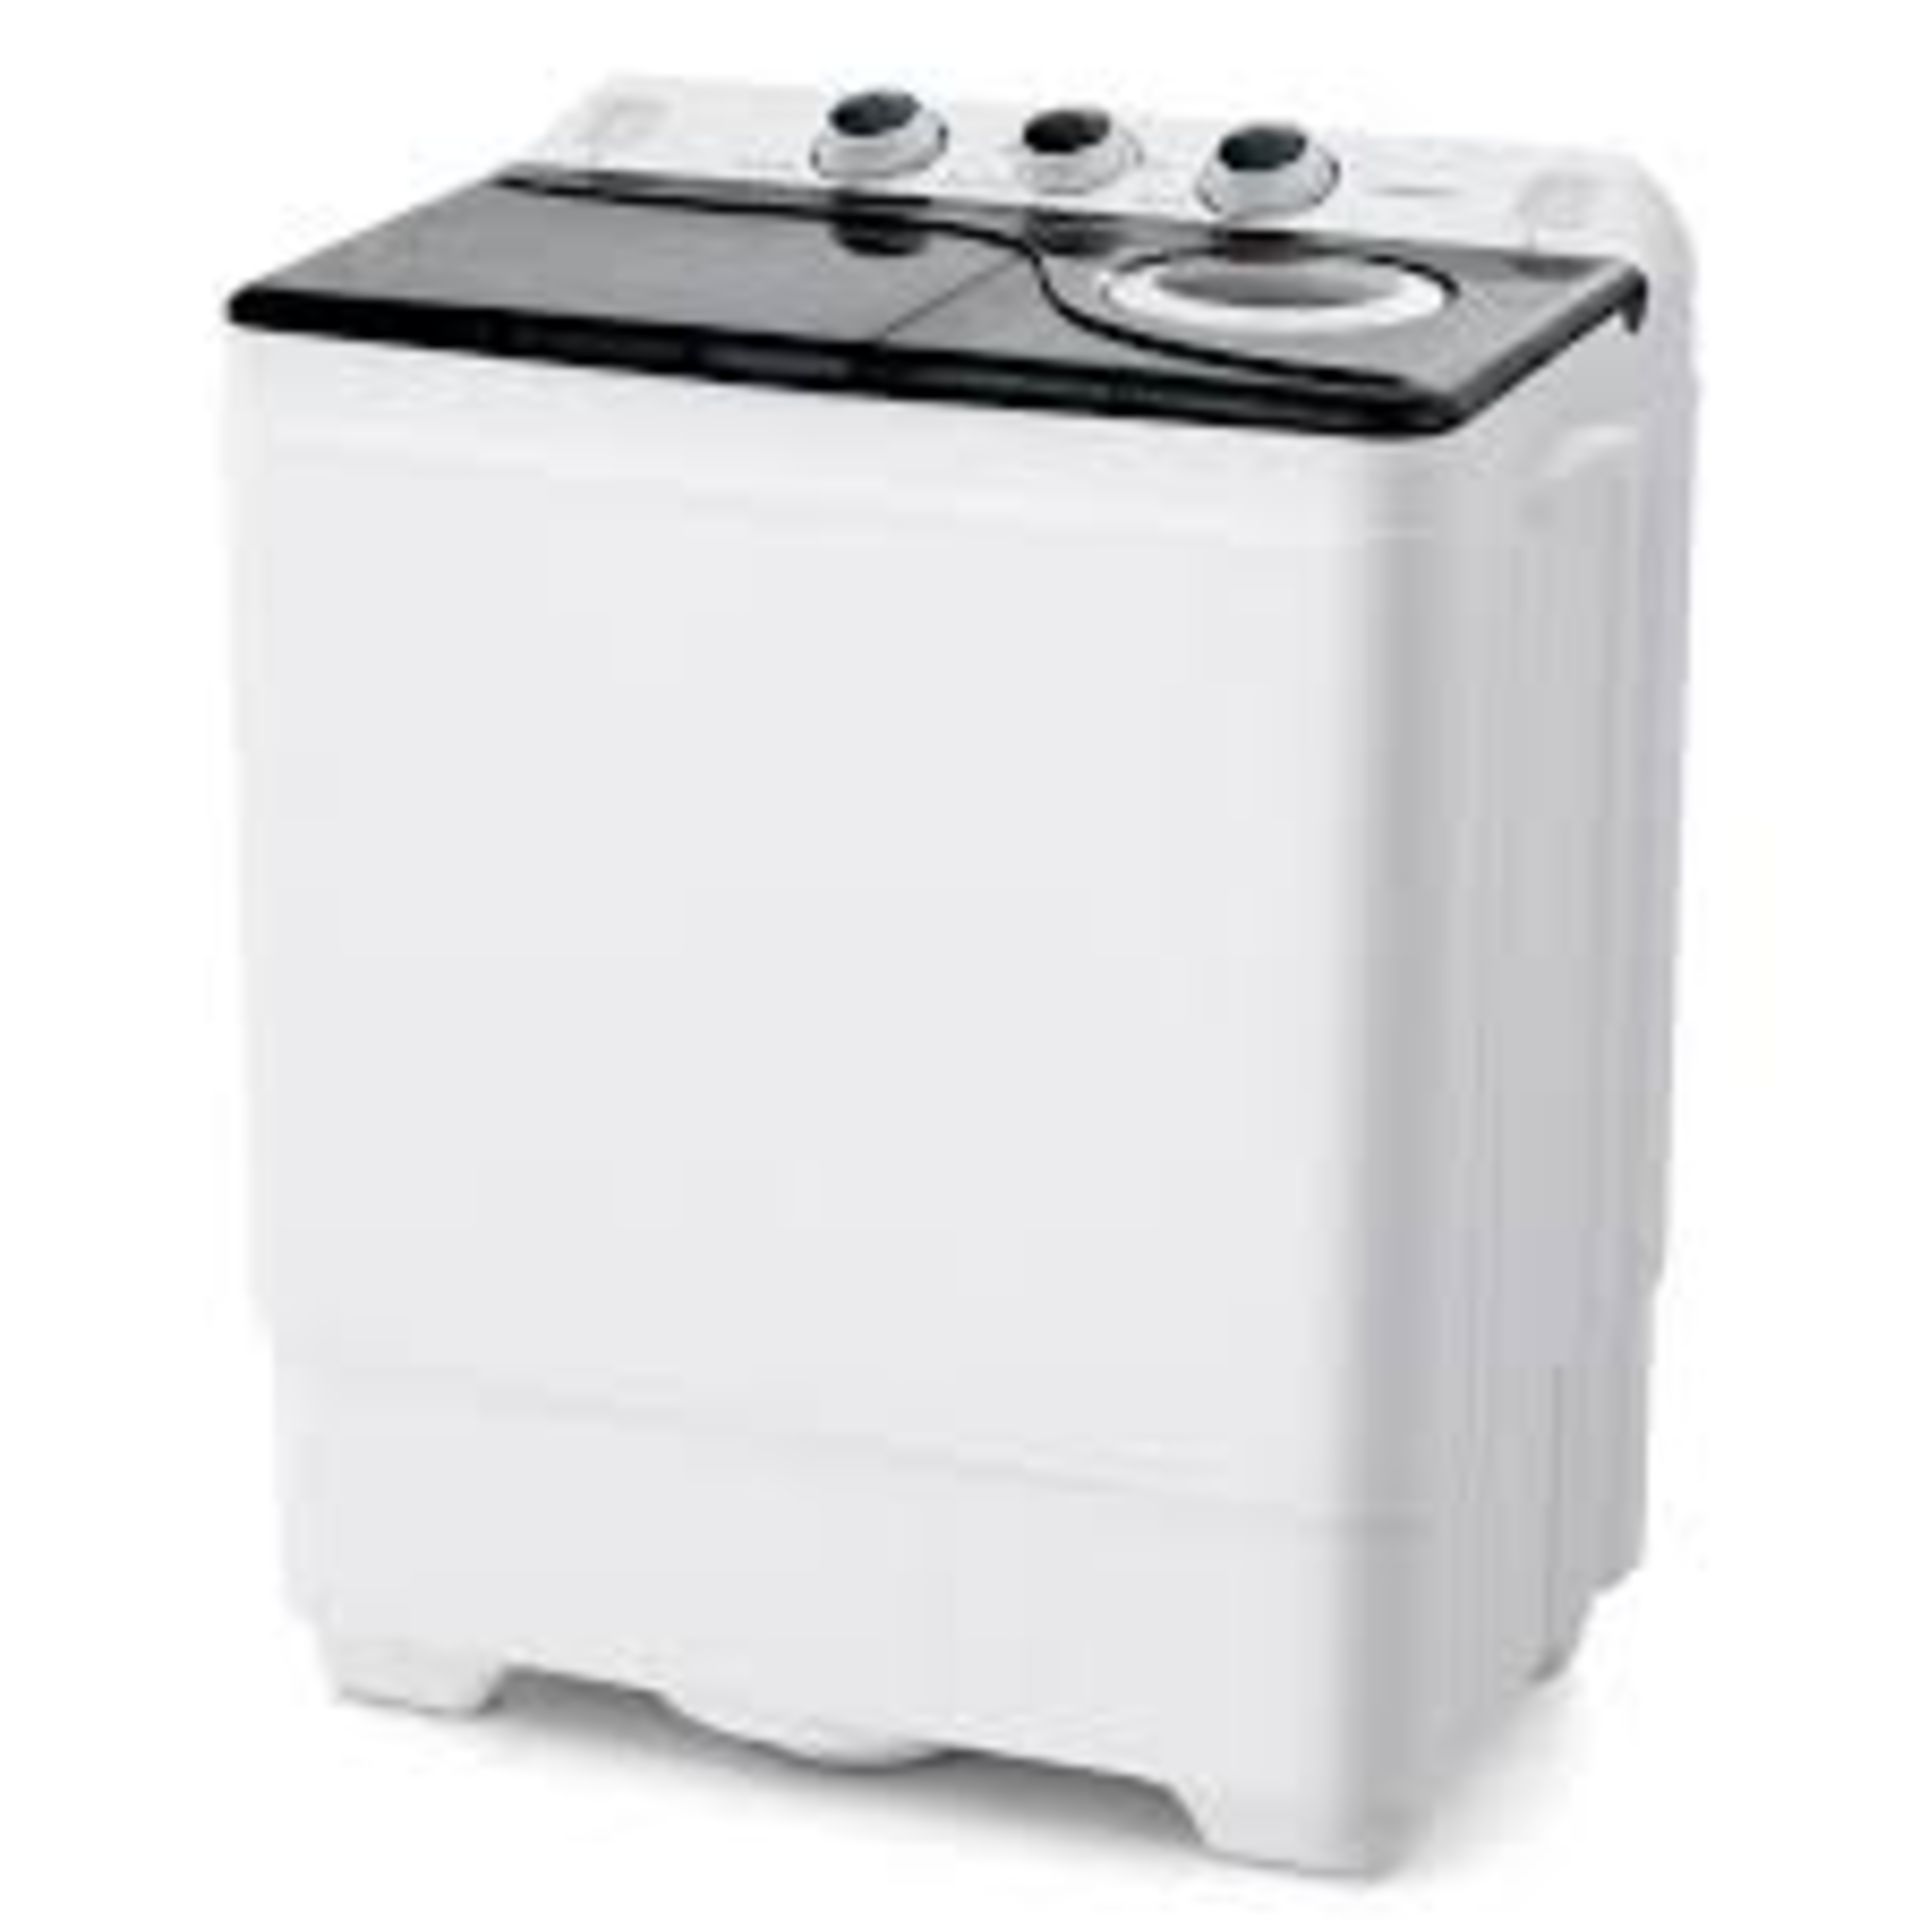 Portable Laundry Washer Spin Dryer with Timing Function. -ER54. Powerful dual-motor makes your